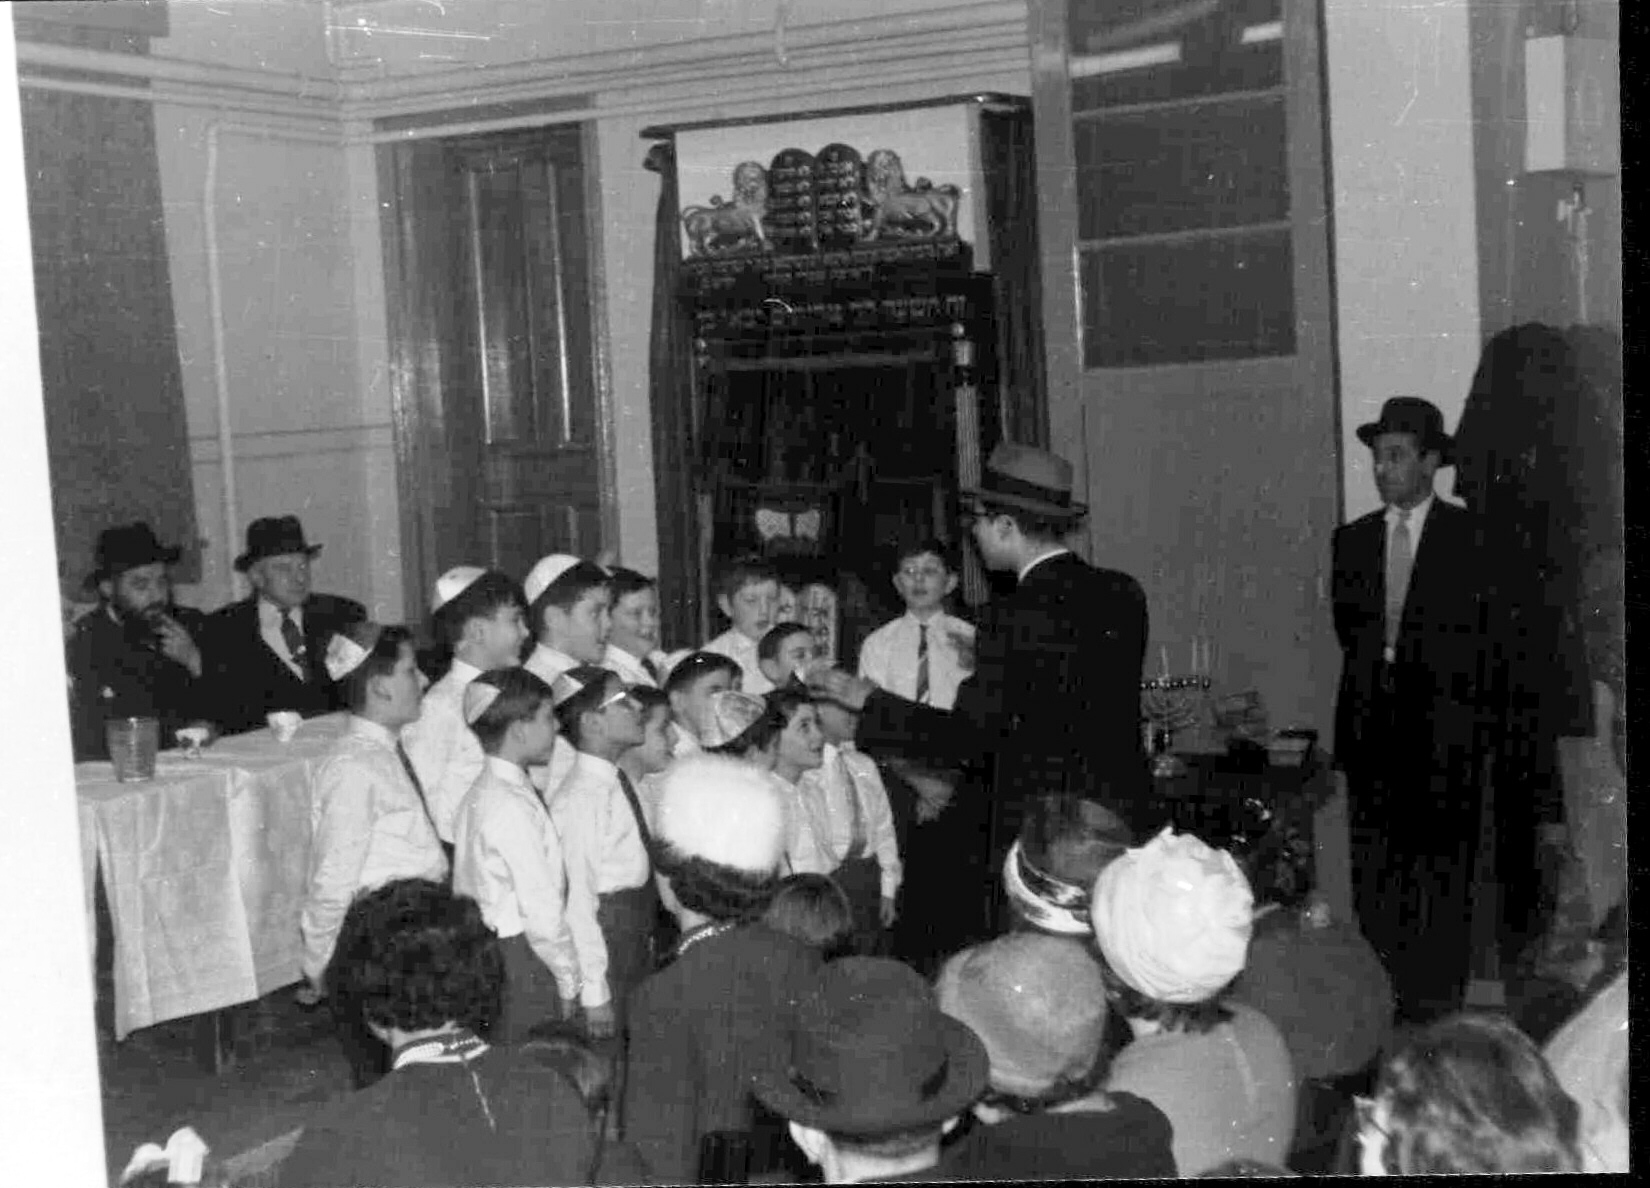 Rabbi S Halstuck of Commercial Road Great synagogue listening to the synagogue's boys choir, early 1950s